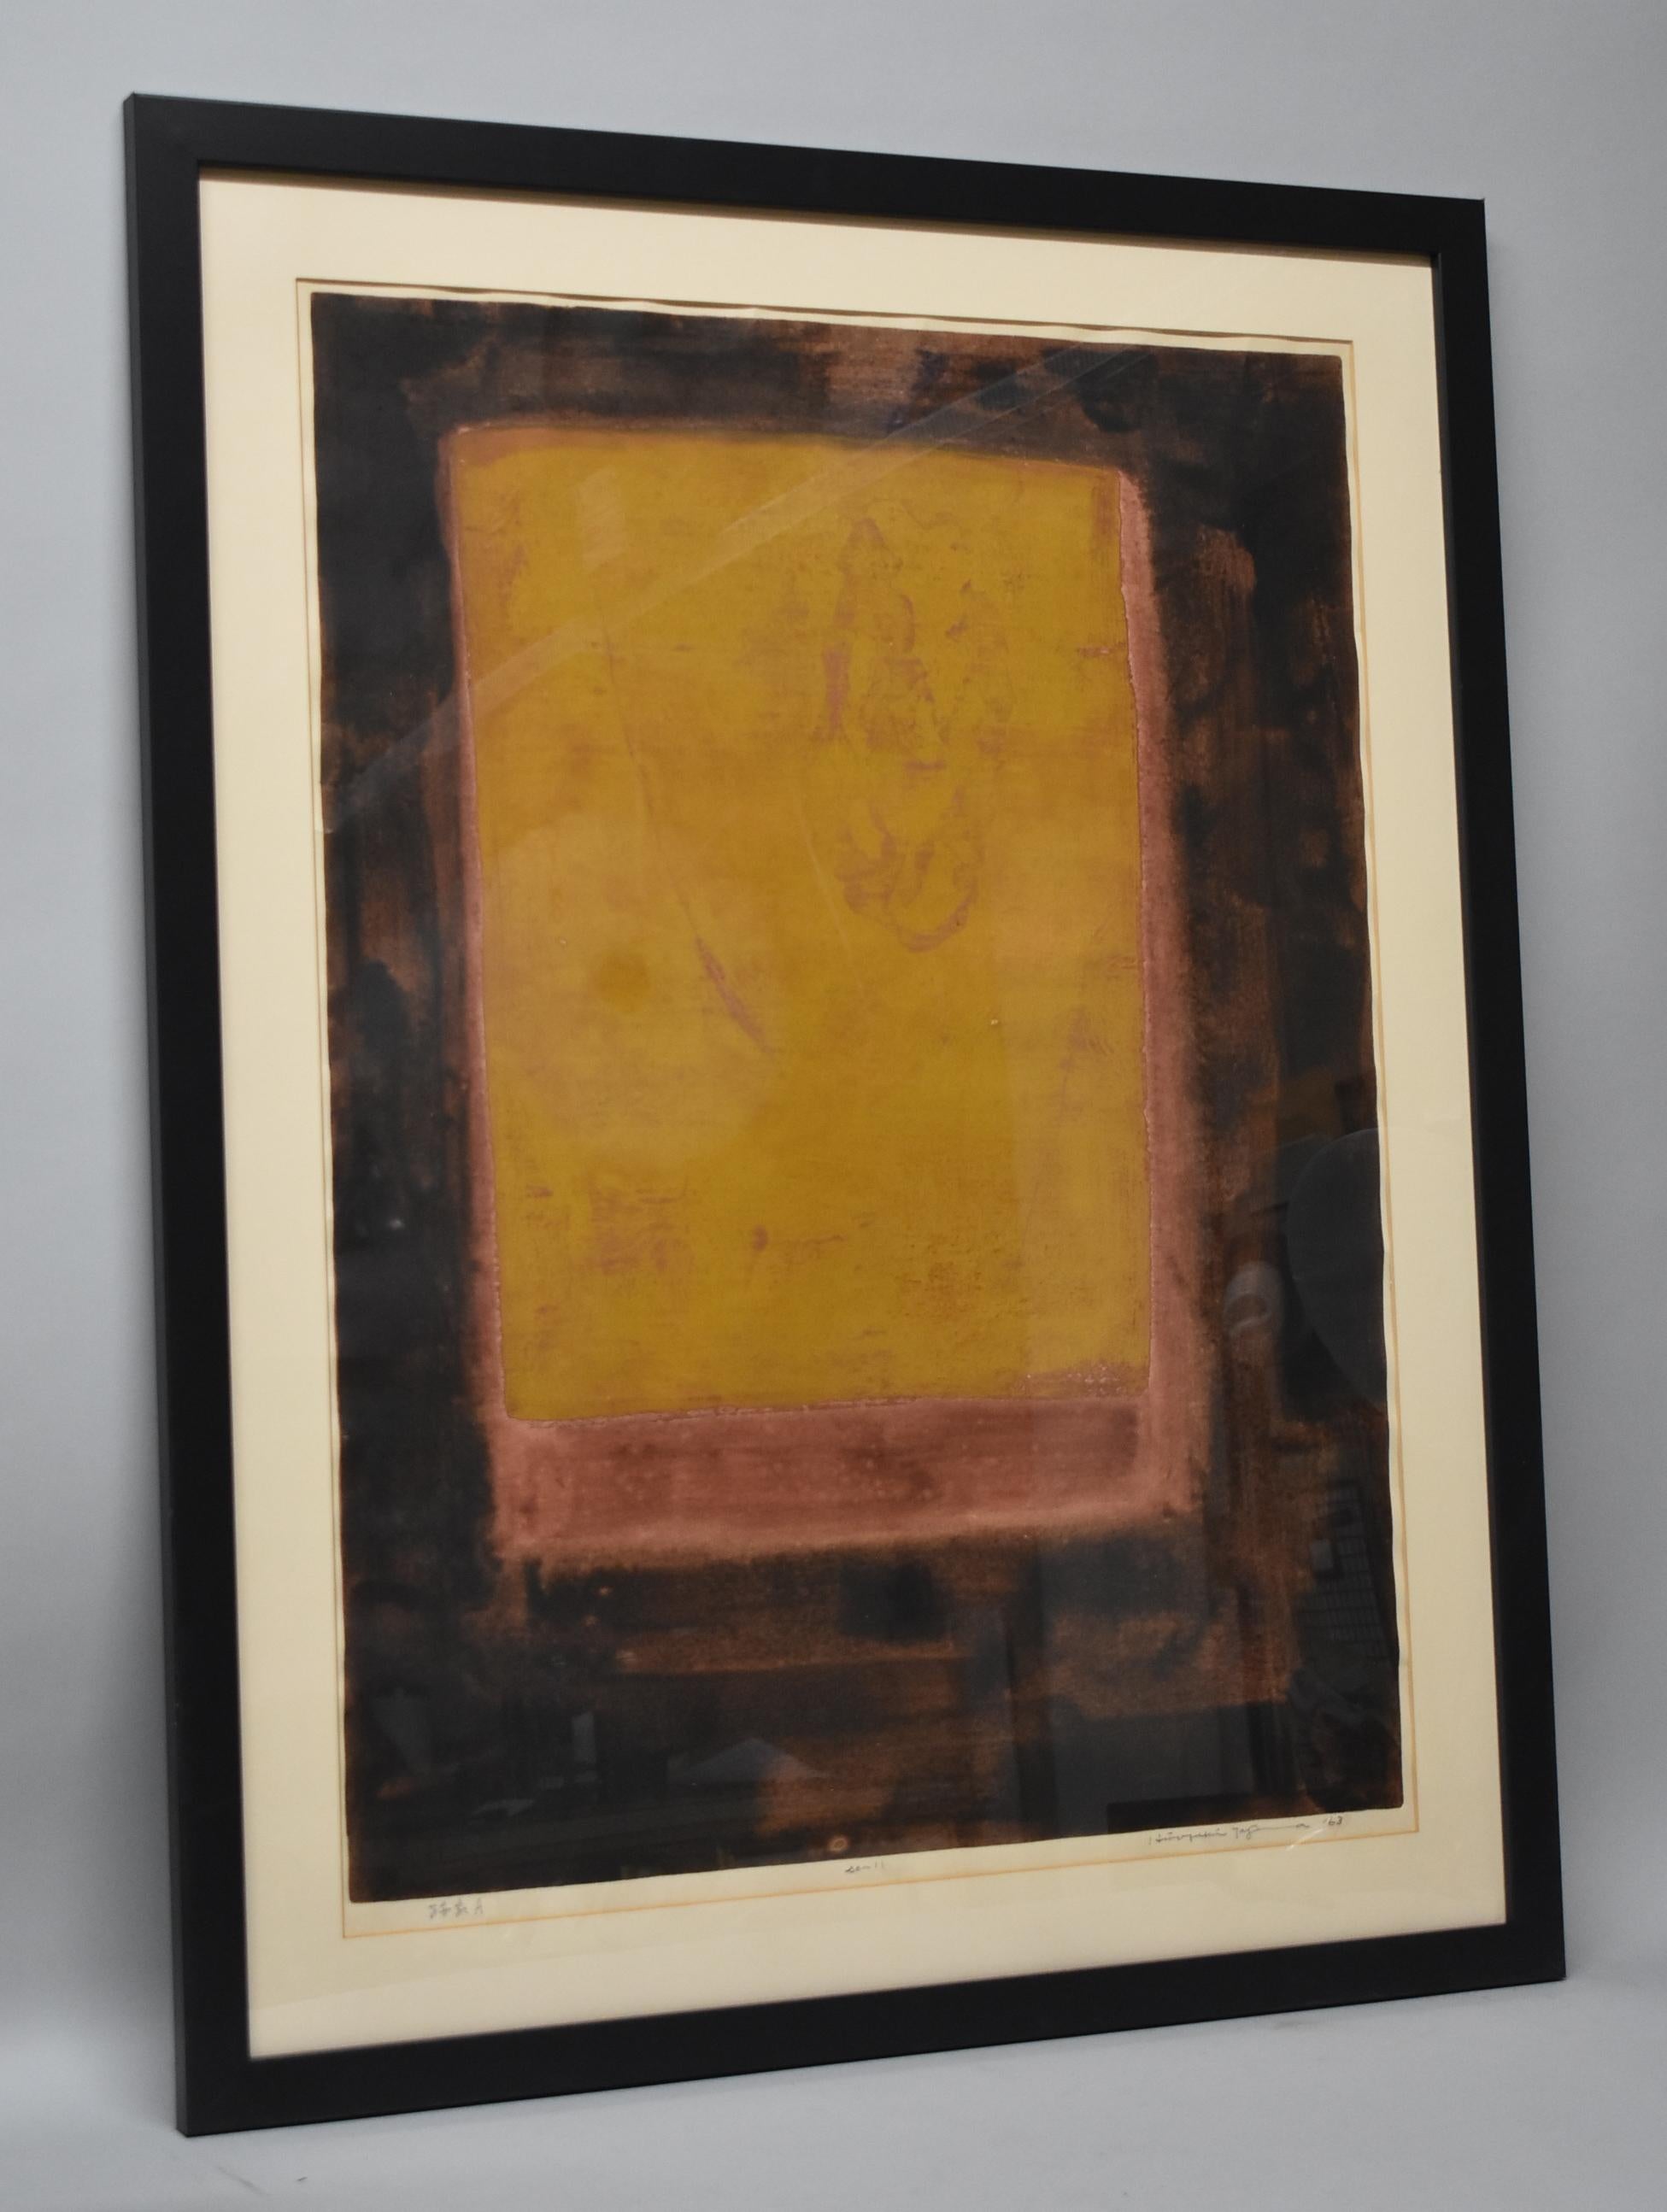 Tajma Hiroyuki (1911-1984) wood block ink and color print on paper from the Showa period in 1963. Signed and dated in pencil in the lower left. One little crease on the edge of the upper left side as shown in the photo. Overall size 30